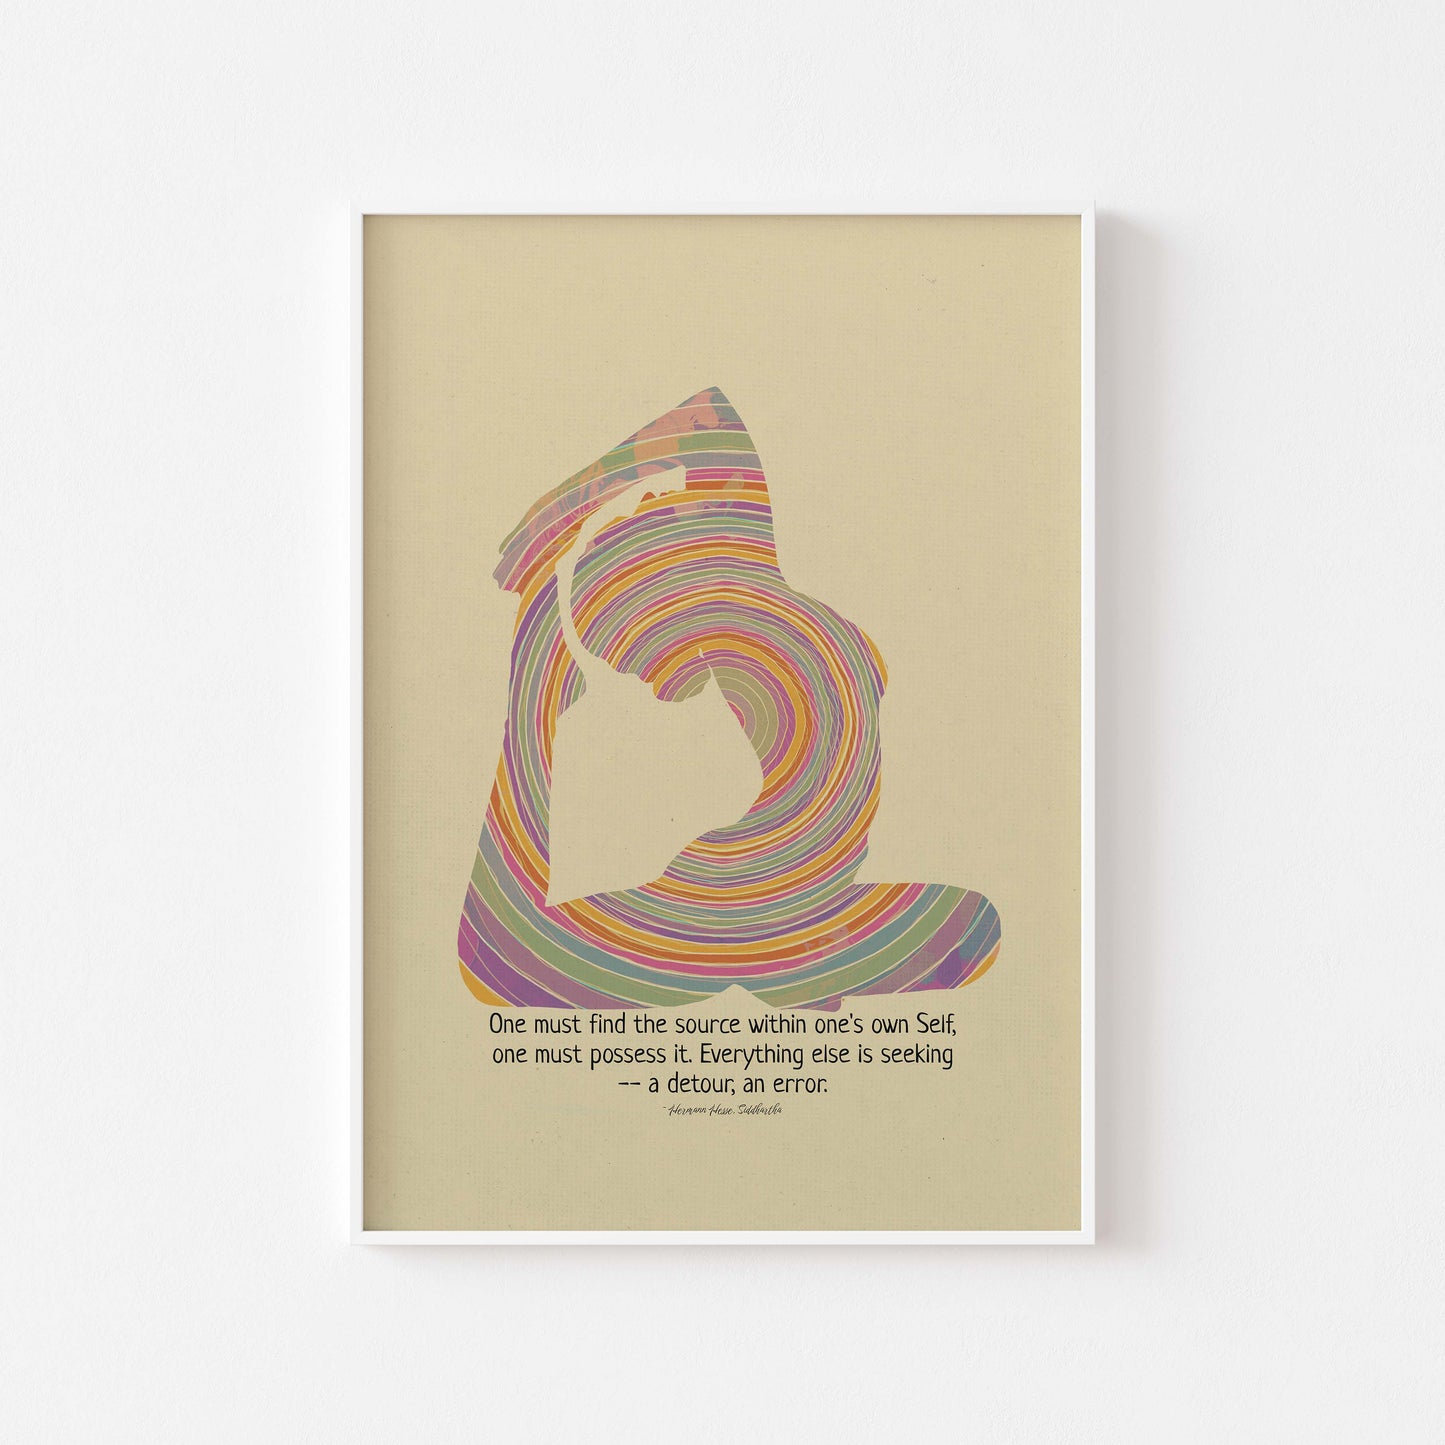 Colorful yoga Pose & a quote by Hermann Hesse, Siddhartha in white frame mockup